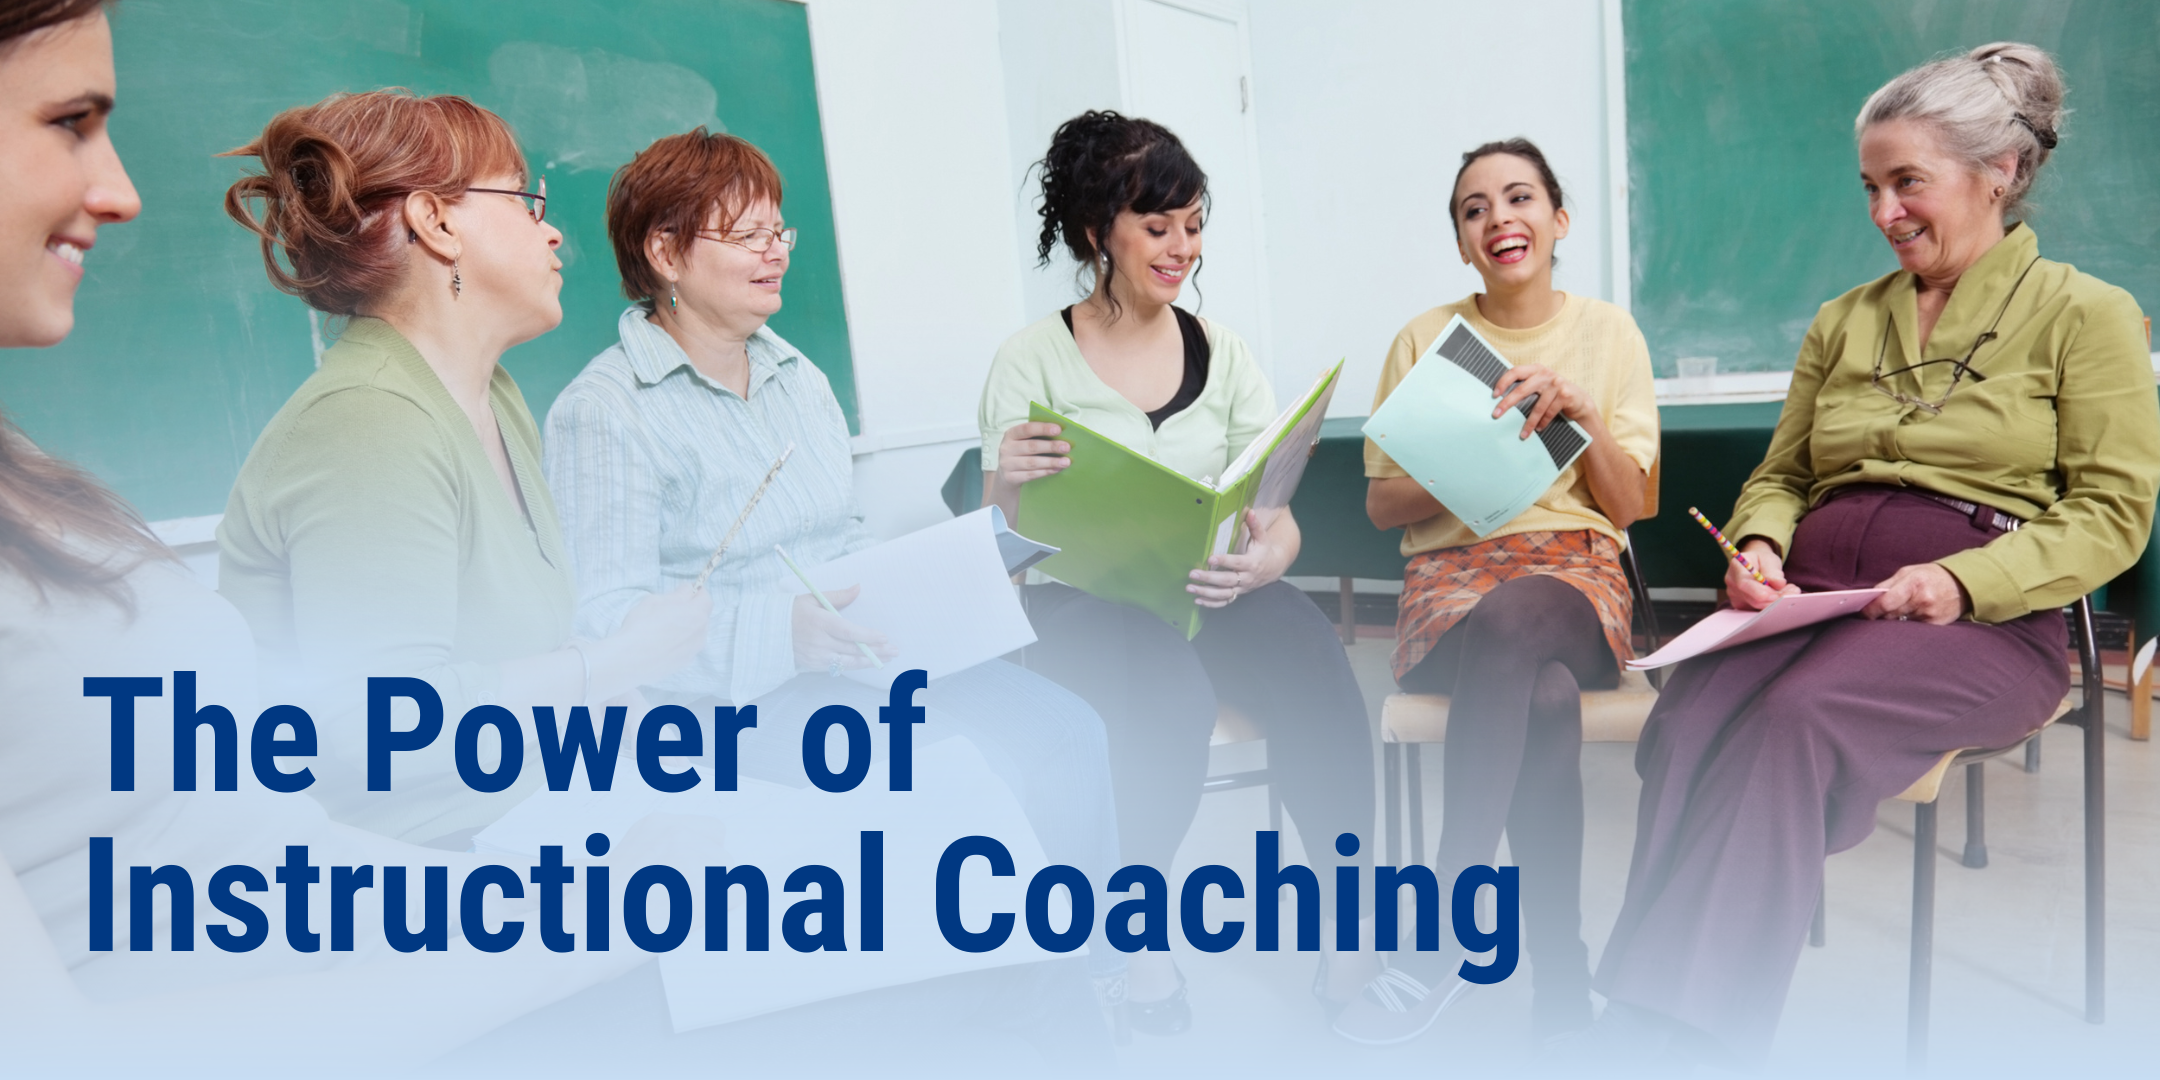 Banner image of a group of individuals collaborating. Blog title "The Power of Instructional Coaching" displayed.